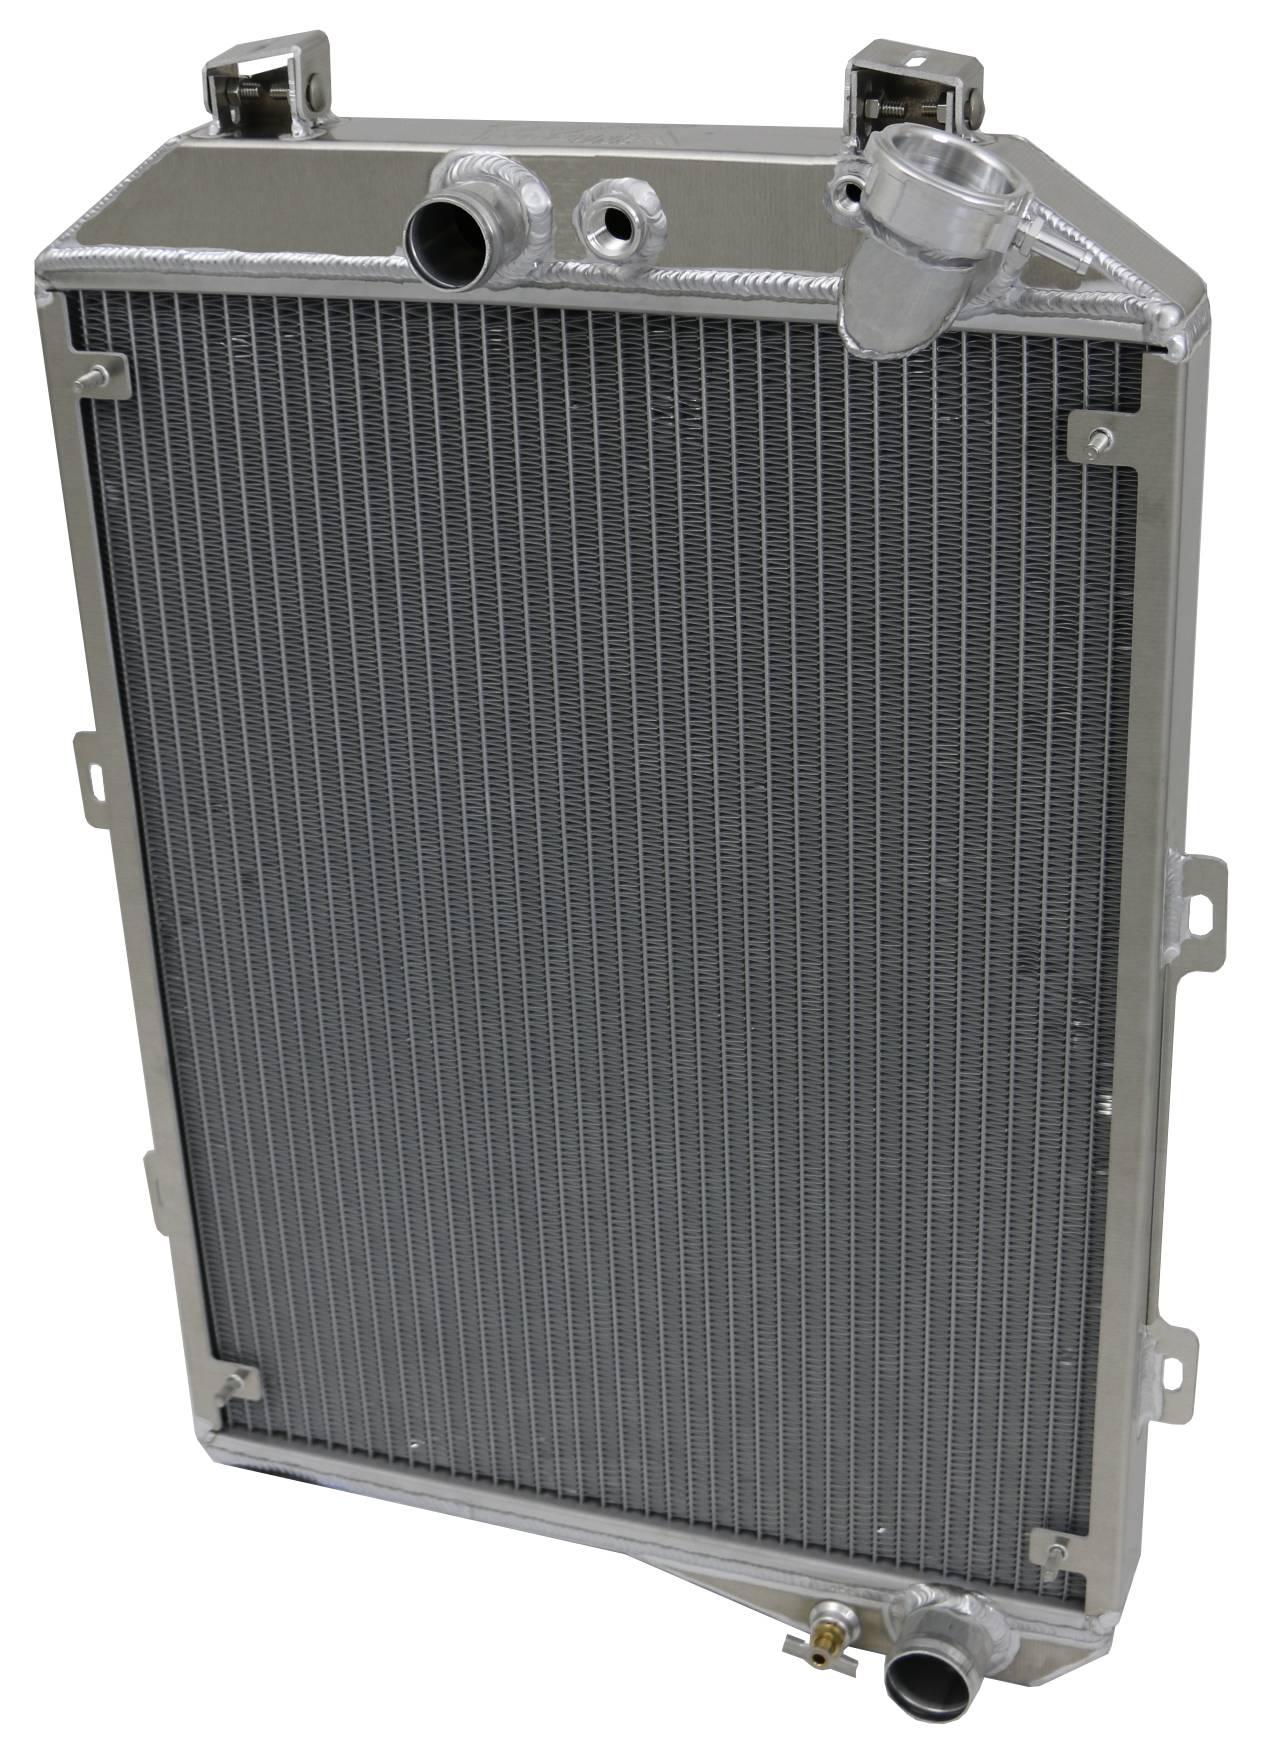 Wizard Cooling Inc - Wizard Cooling - 1936 Buick Aluminum Radiator (Straight 8) - 10497-500